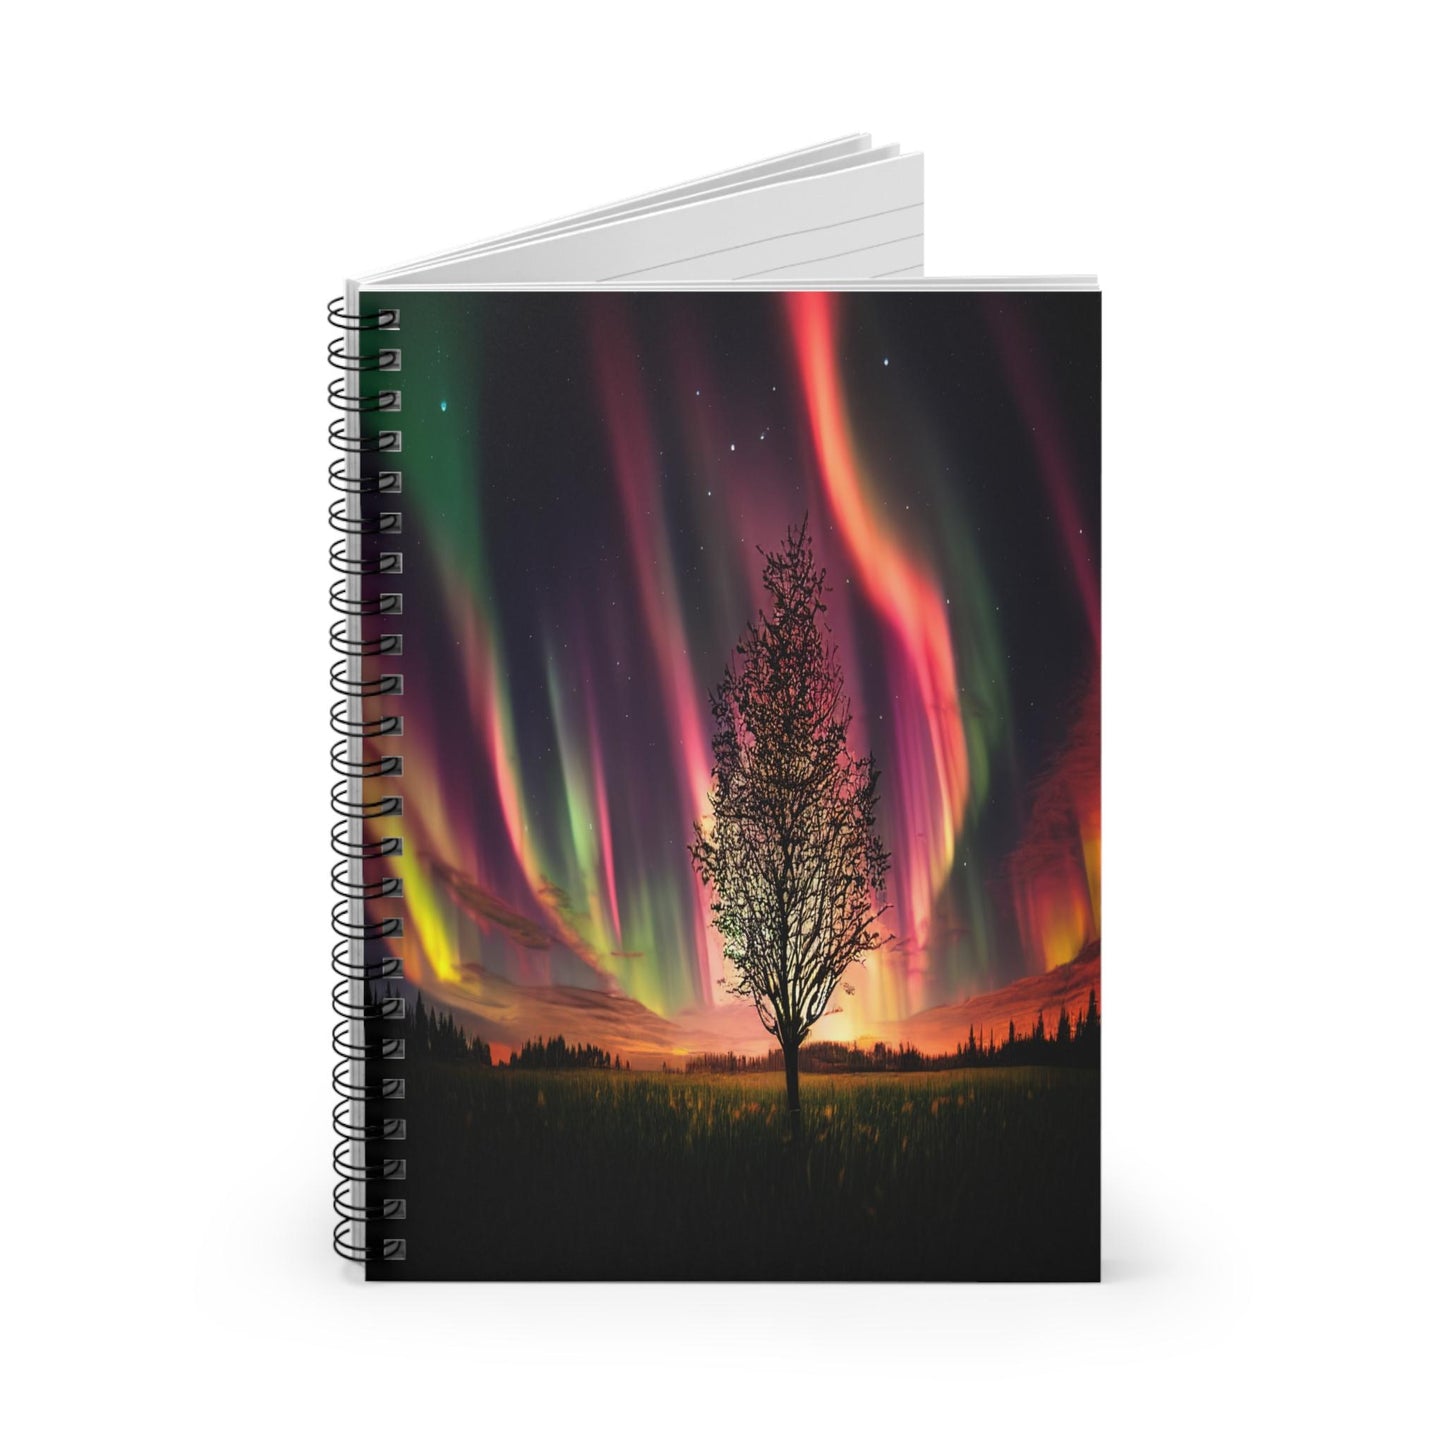 Unique Aurora Borealis Spiral Notebook Ruled Line - Personalized Northern Light View - Stationary Accessories - Perfect Aurora Lovers Gift 37